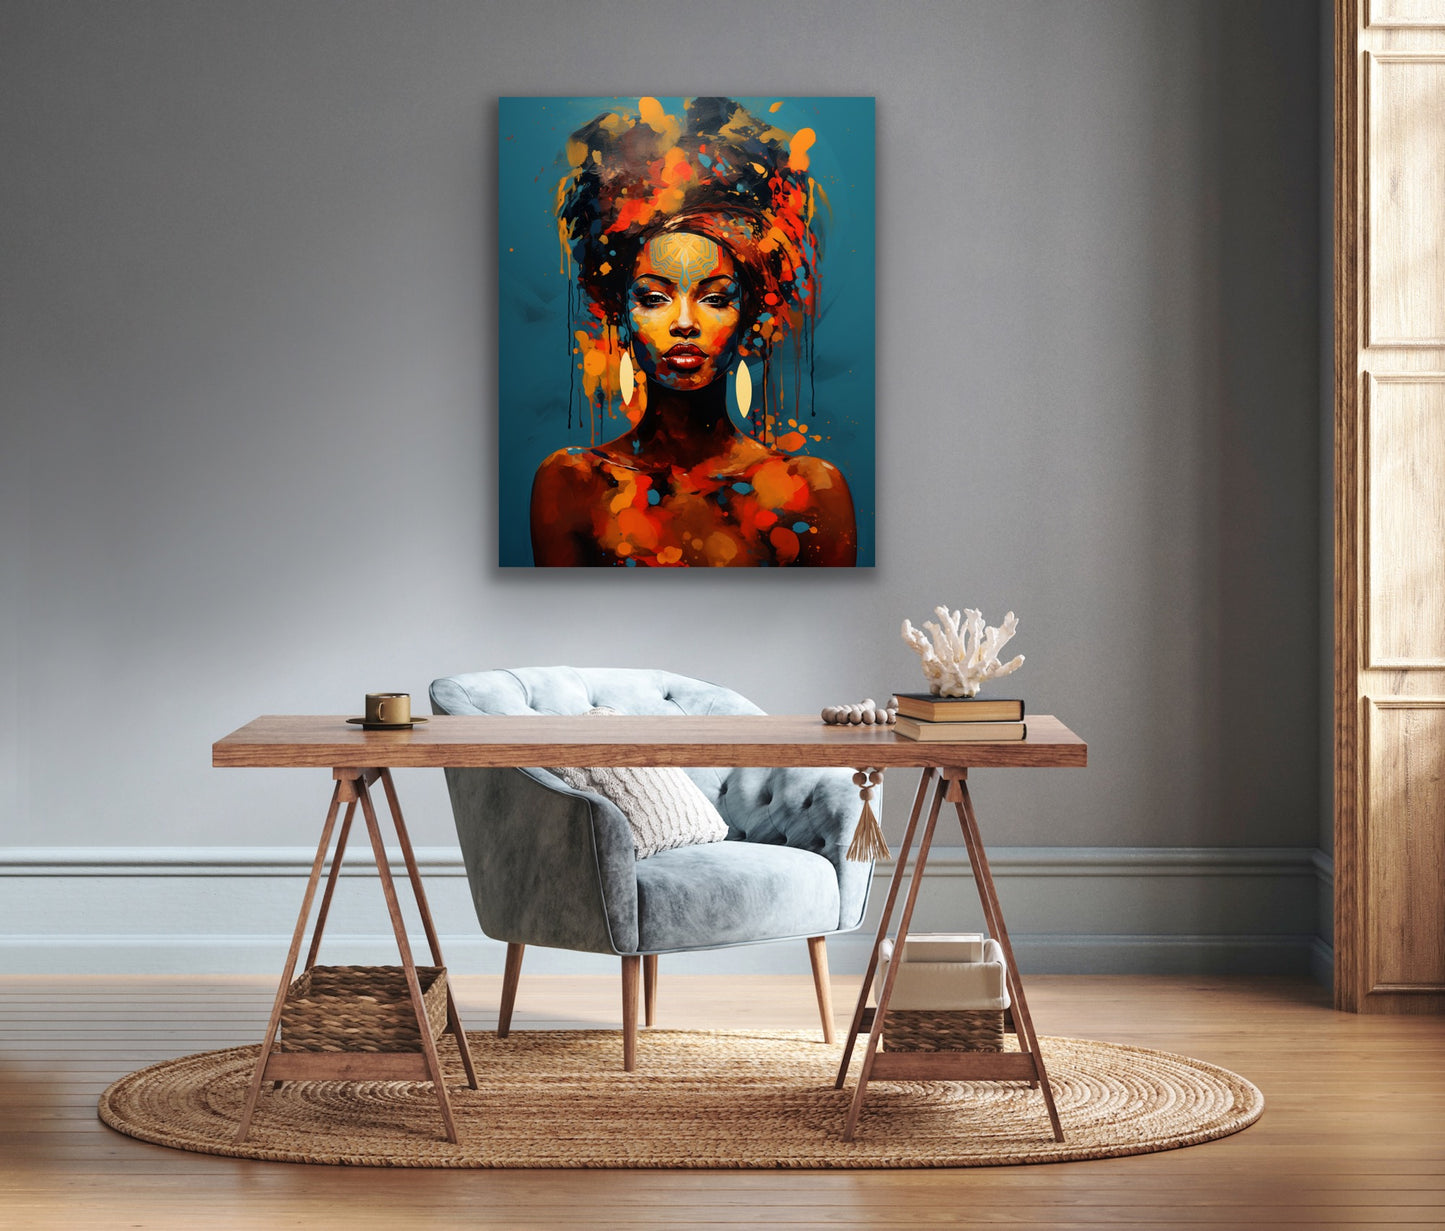 Queen To Be | Stretched Canvas Print Wall Art | Black Art | African American Art